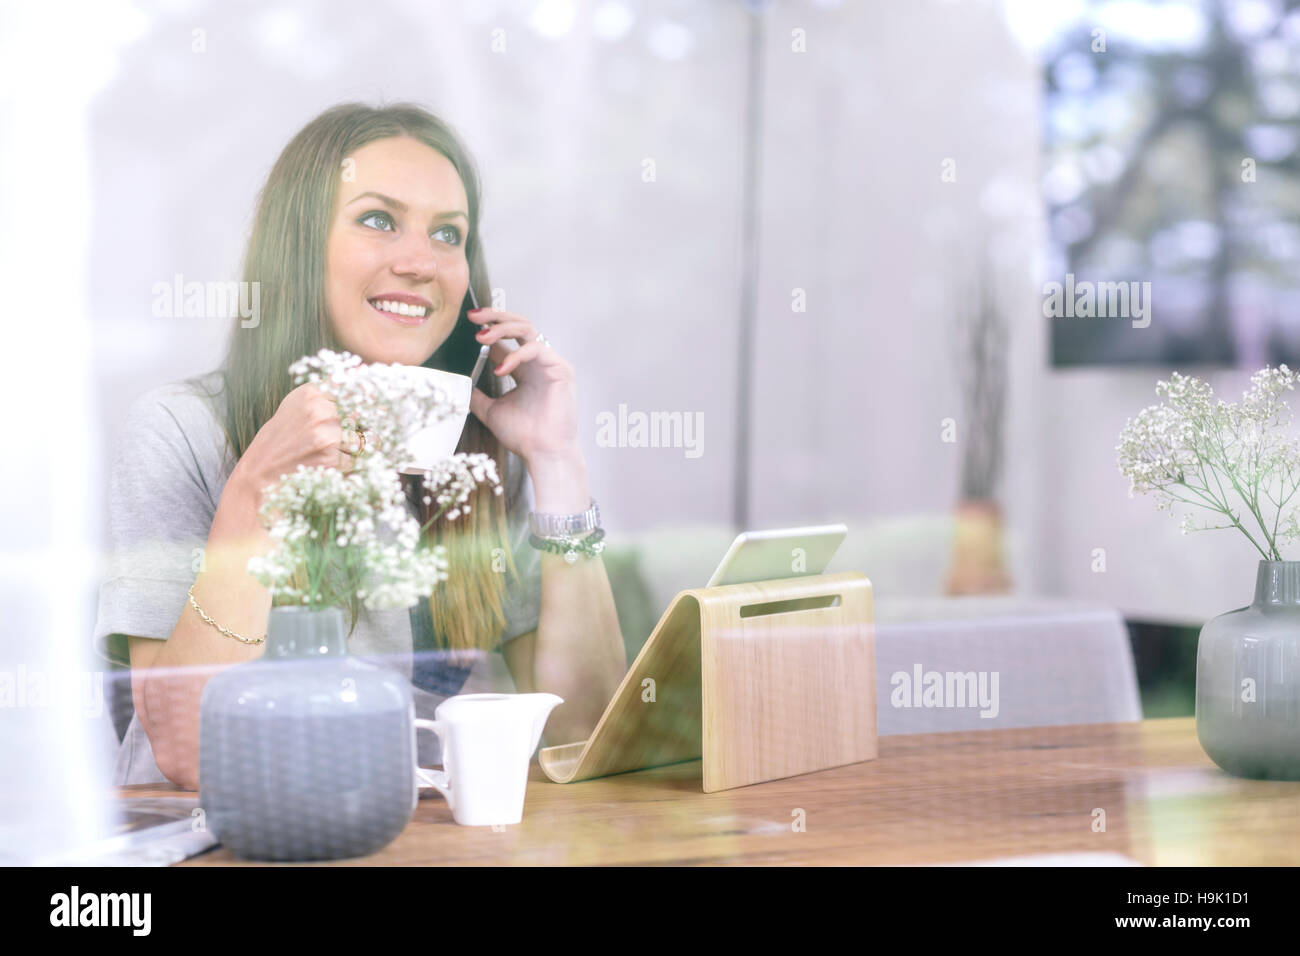 Smiling young woman at home using cell phone and tablet Stock Photo